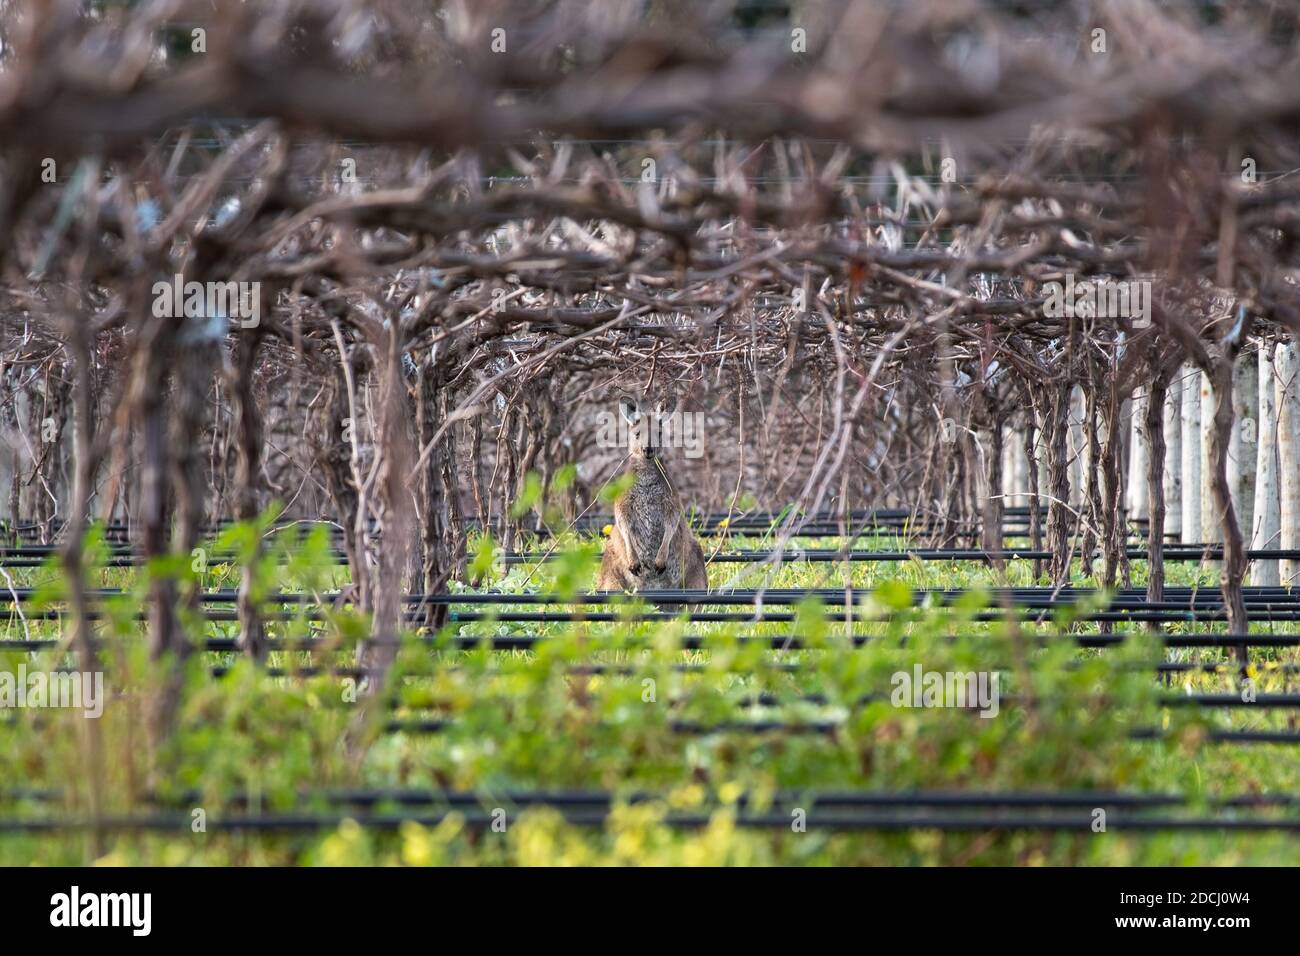 Wild kangaroo (euro) hiding among the vineyards, eating grass in the wine fields. Iconic kangaroo framed by the vineyards and the grass. Barossa valle Stock Photo